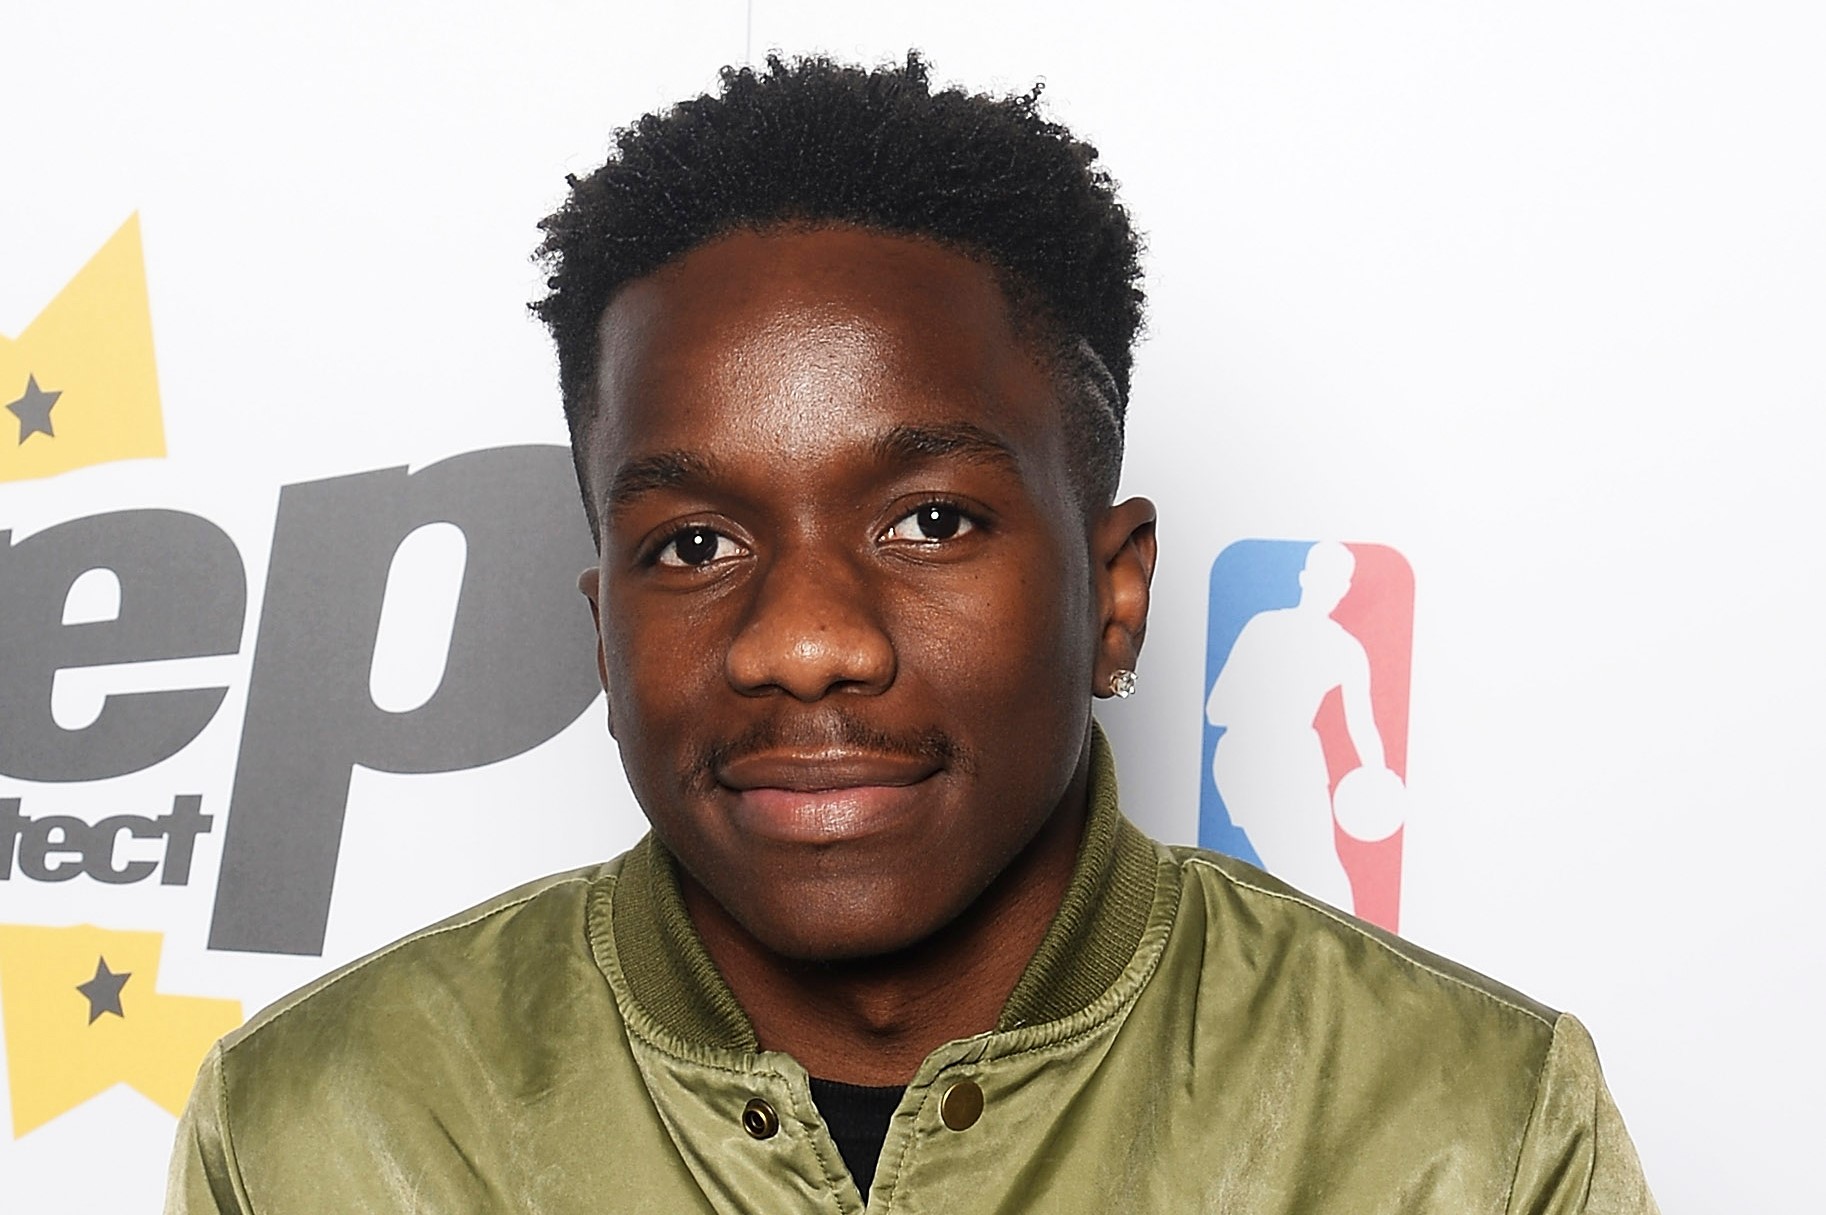 18-astonishing-facts-about-tinchy-stryder